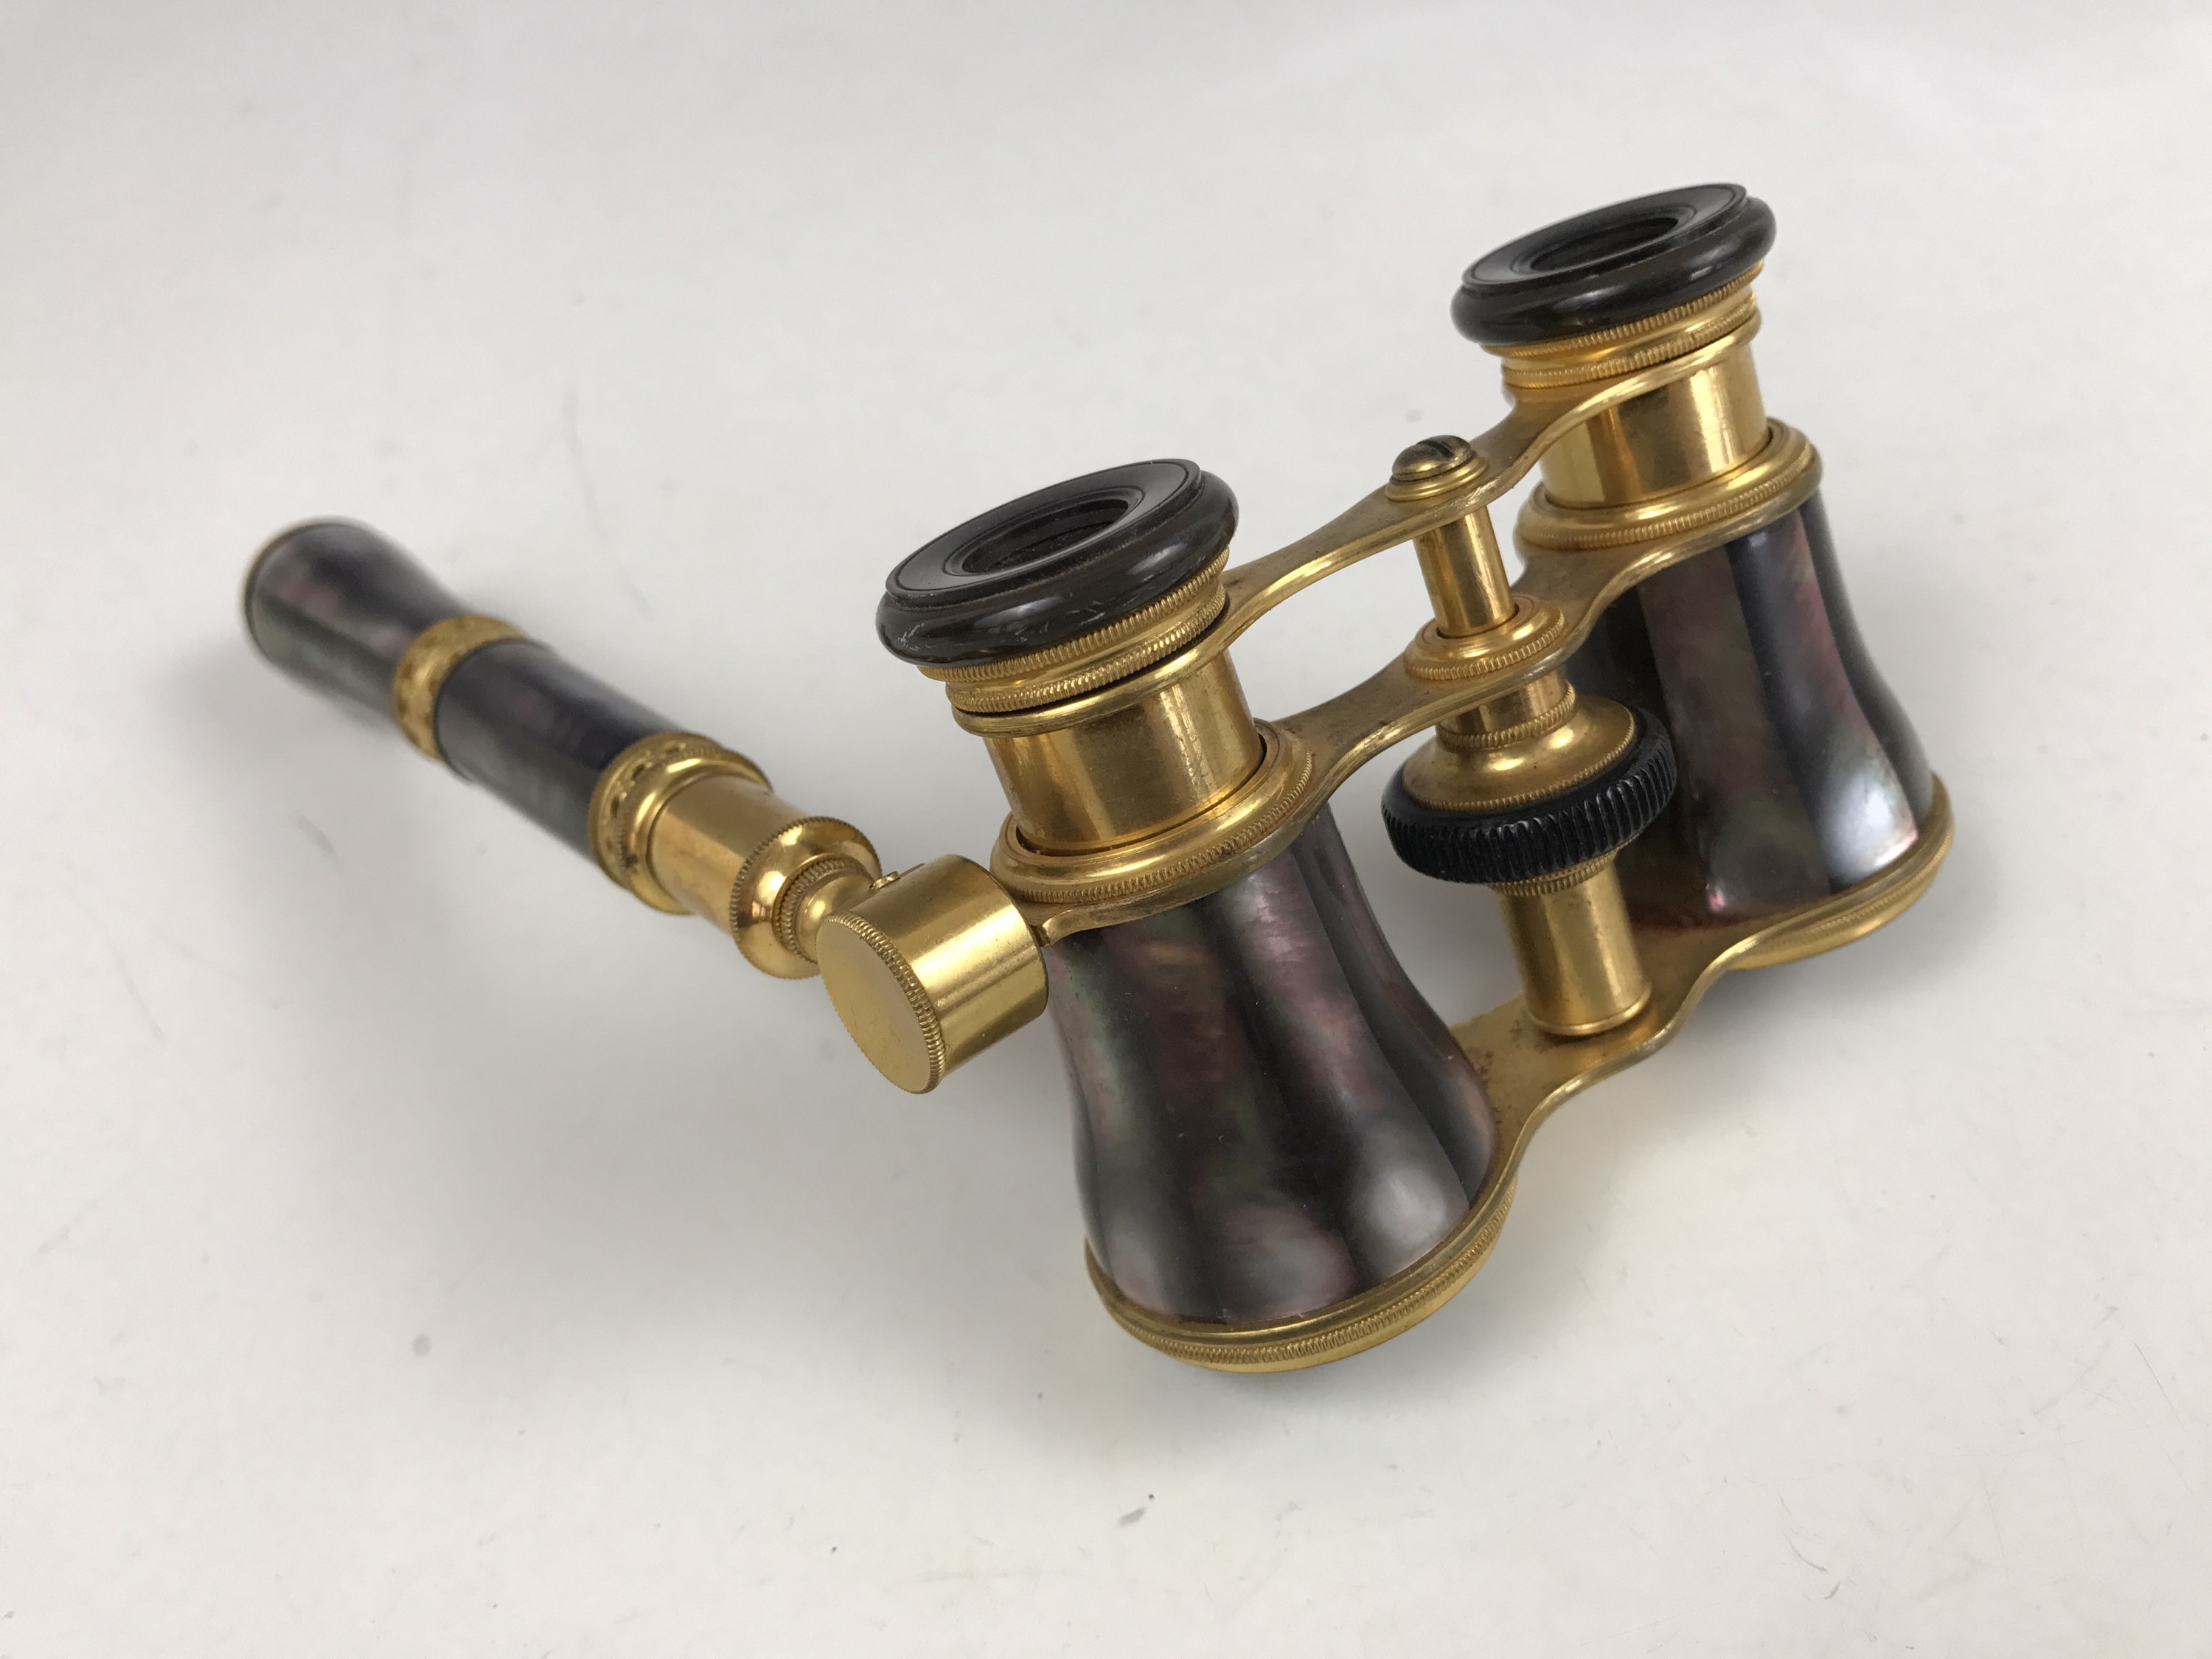 A set of Belle Epoque opera glasses in mother-of-pearl and gilt brass, with telescopic handle - Image 2 of 2